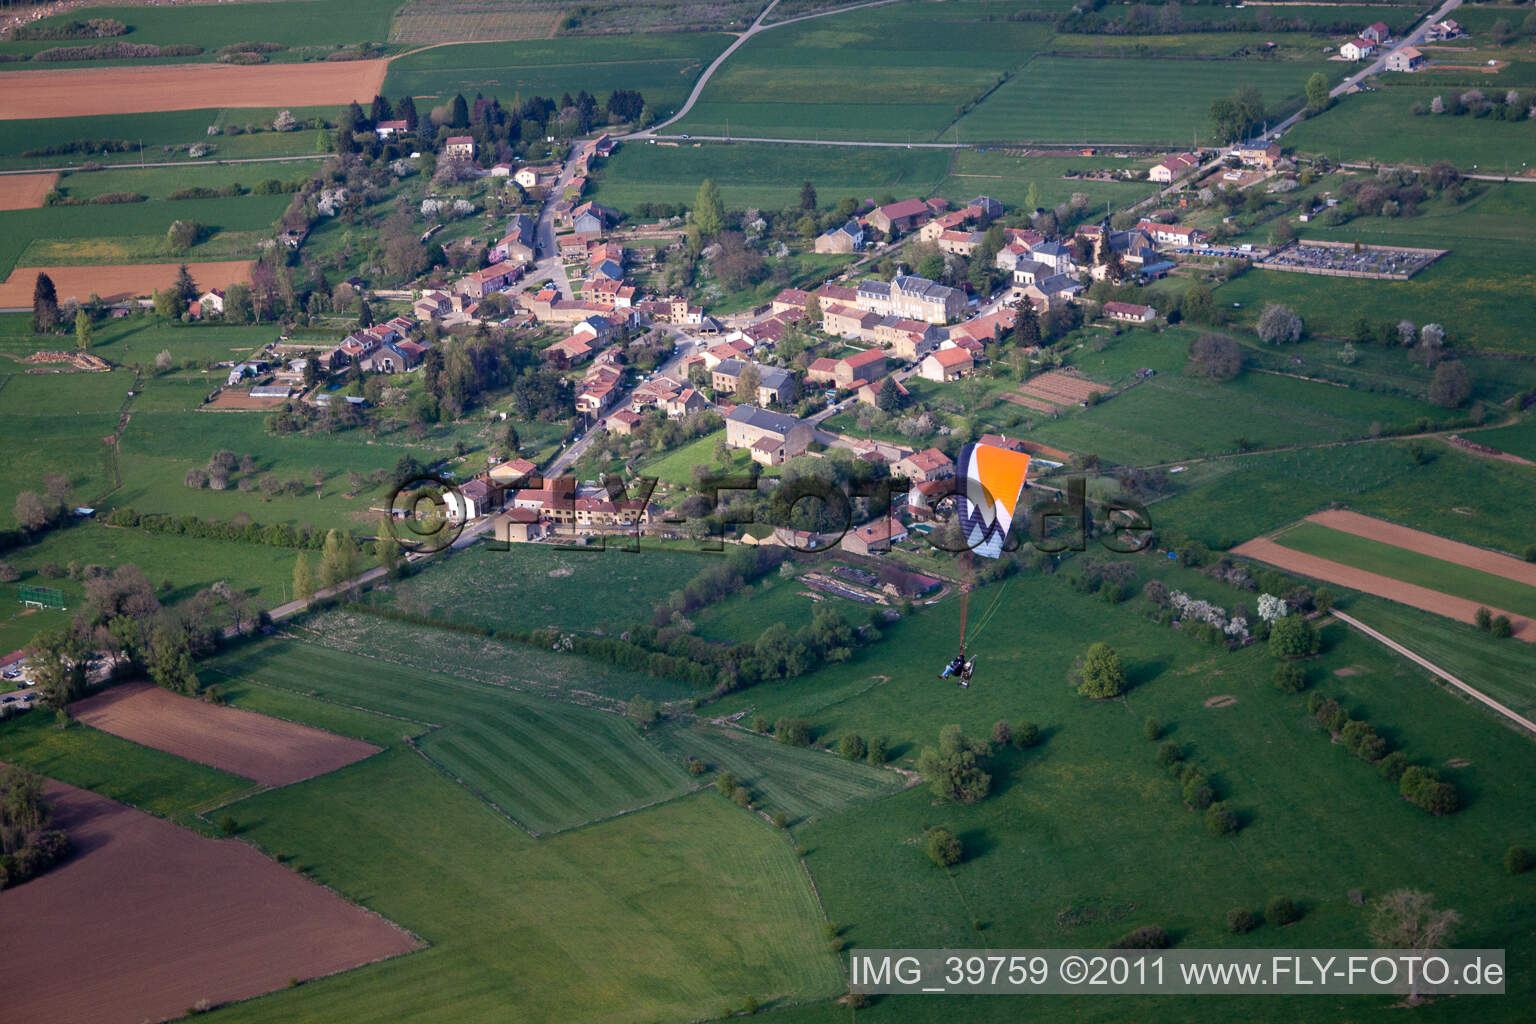 Aerial view of Rouvroy in the state Luxembourg, Belgium